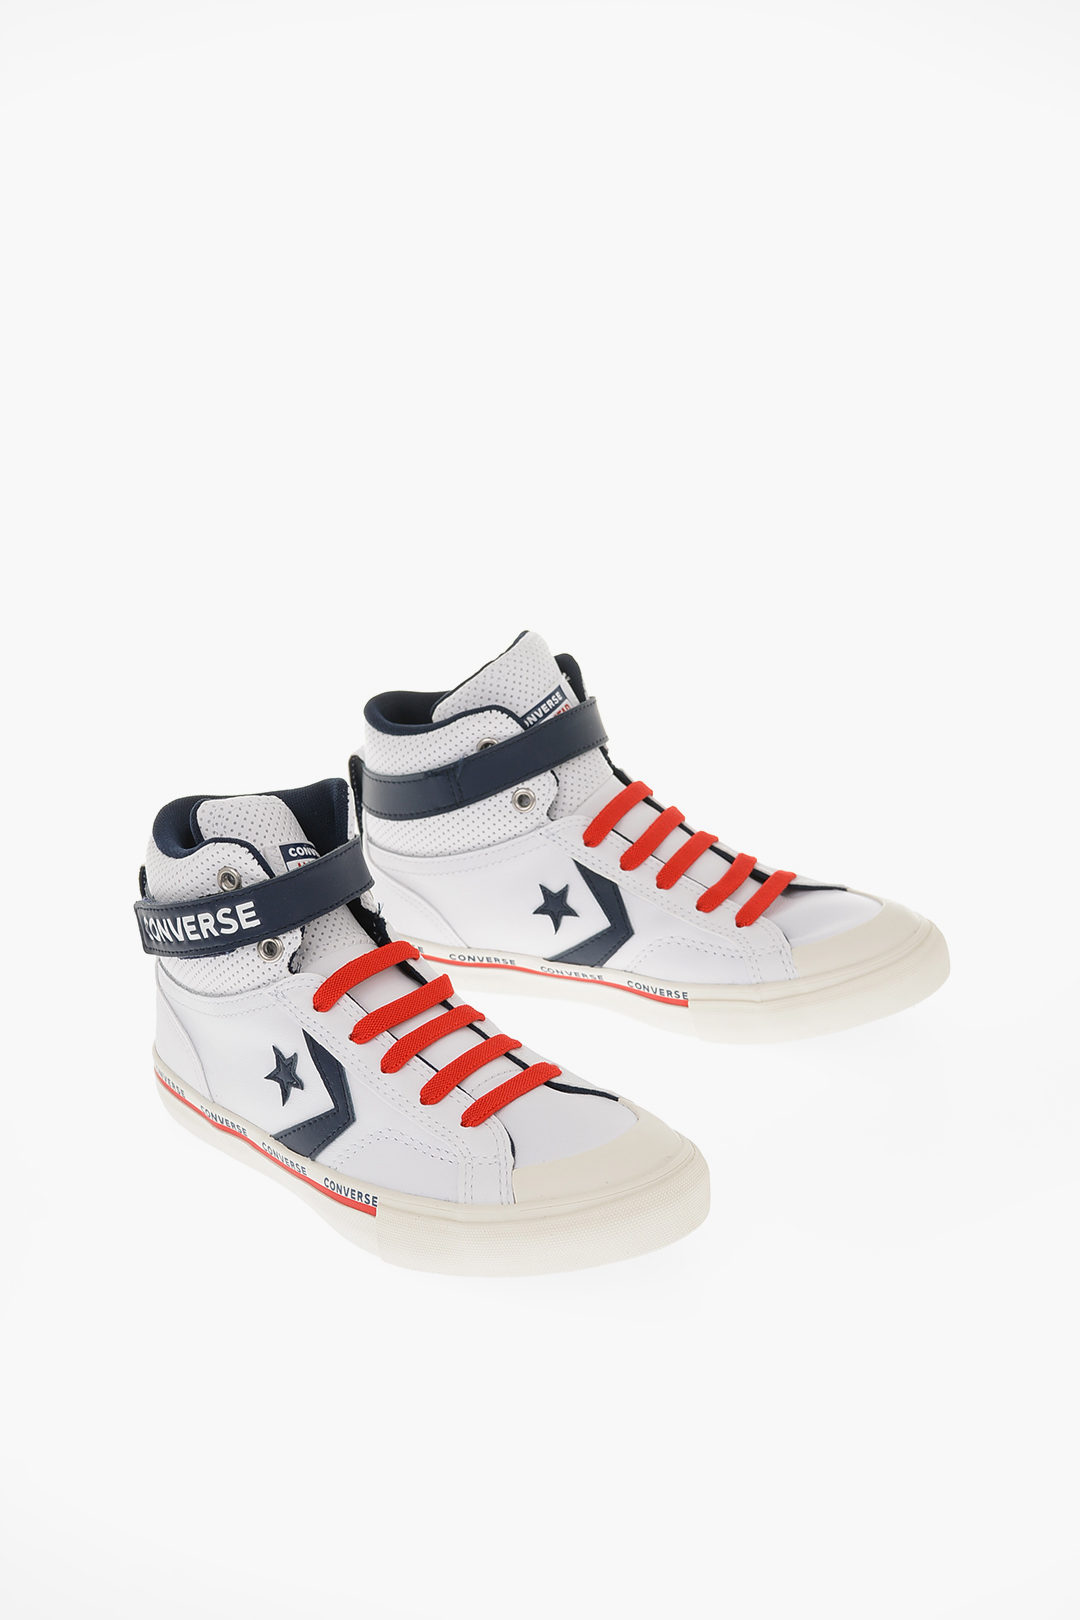 converse leather high tops kids